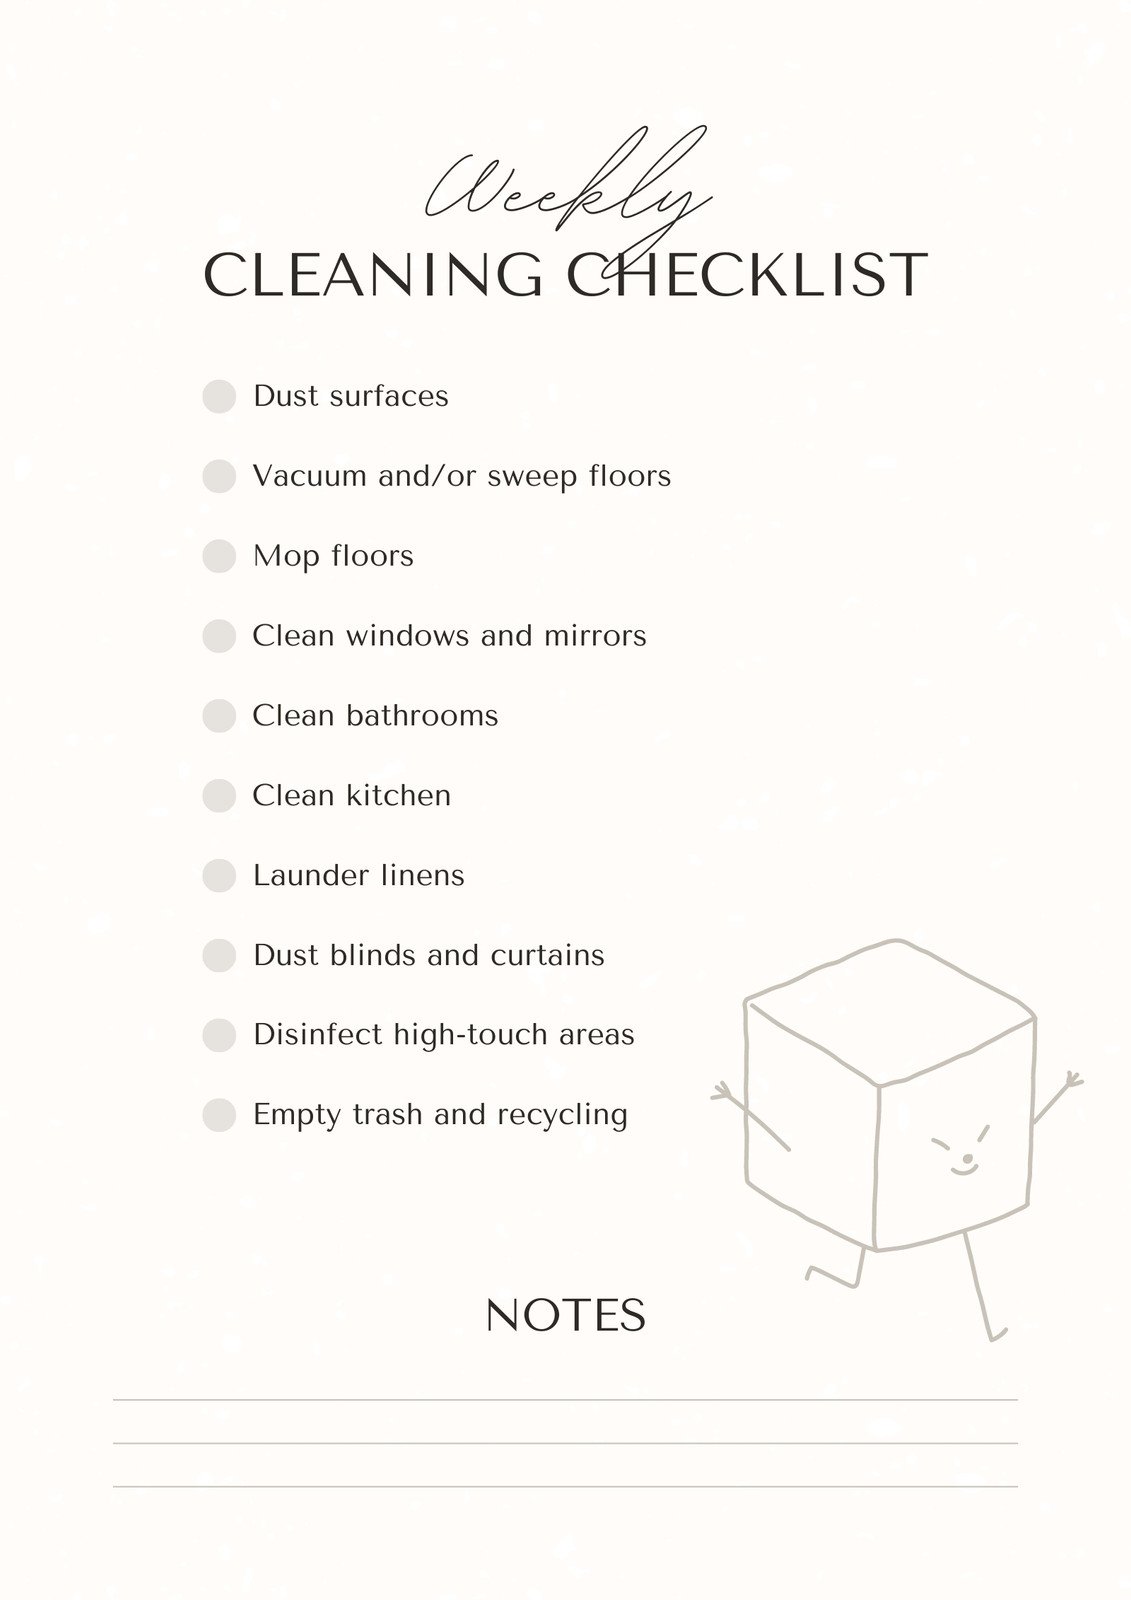 https://marketplace.canva.com/EAFb4hVgQy4/1/0/1131w/canva-ivory-minimal-aesthetic-weekly-cleaning-checklist-qL6X9ct4yQ8.jpg